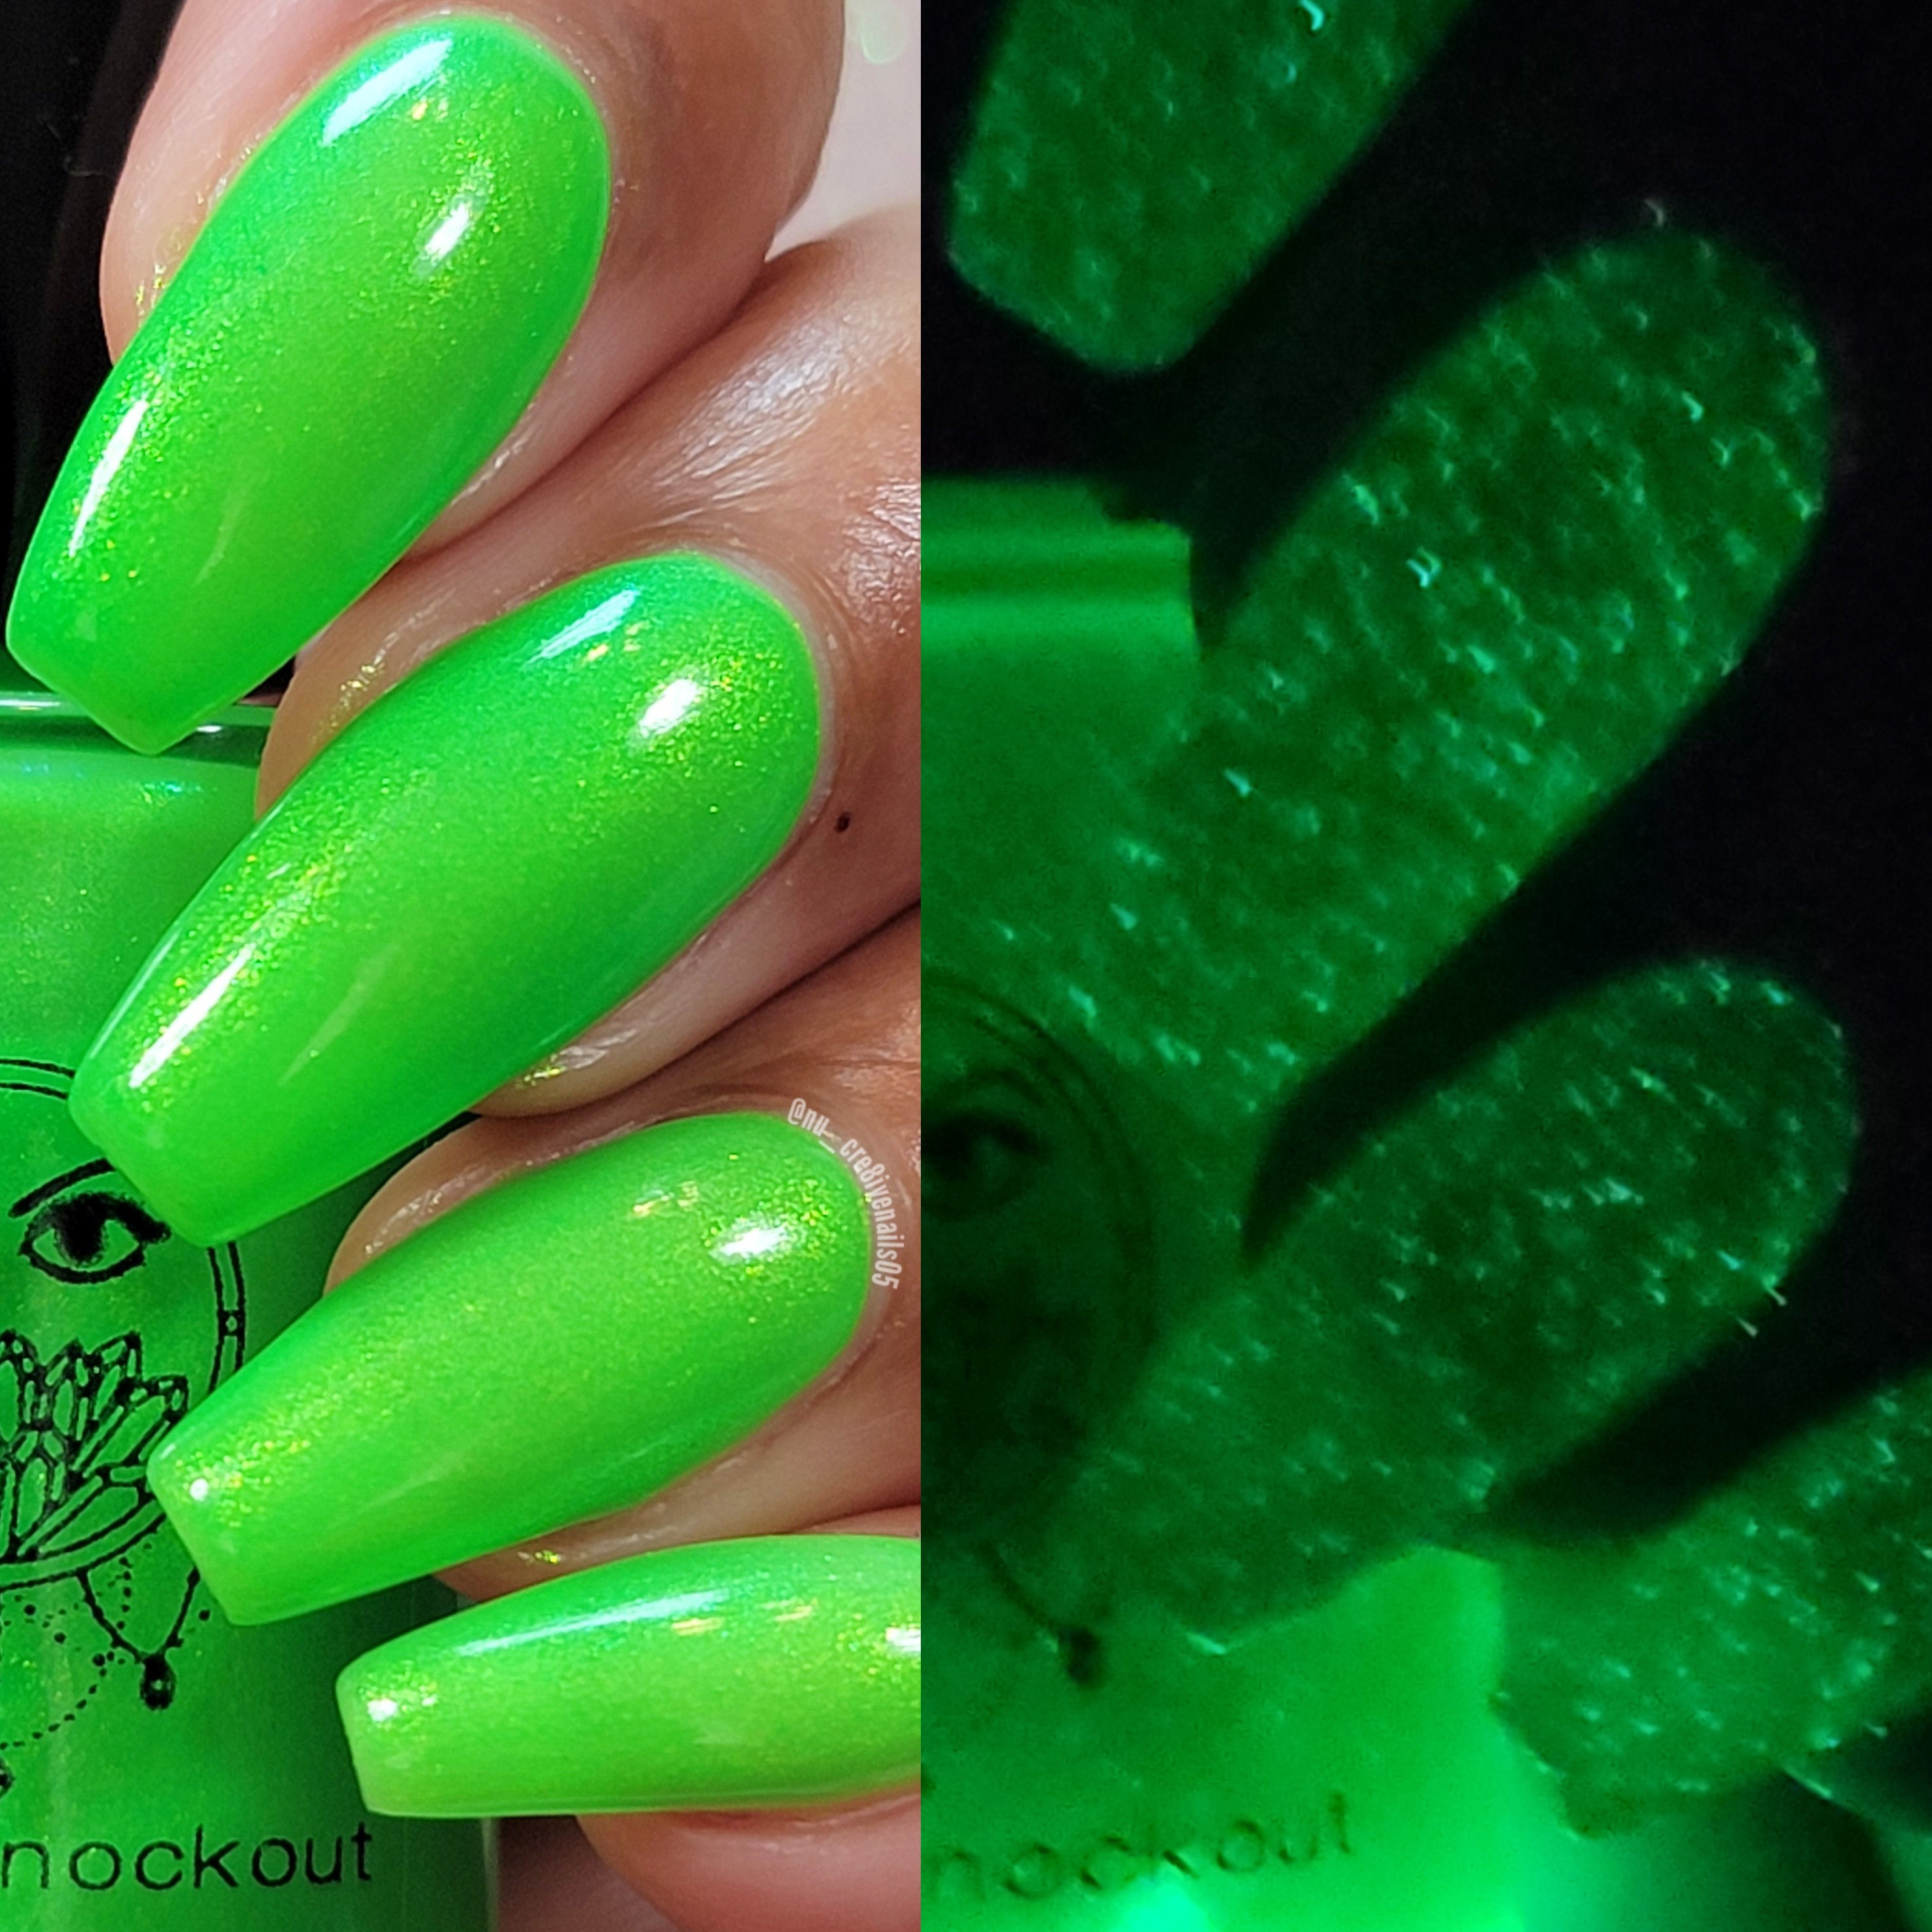 Neon Green Glow in the Dark Nail Polish, Bright Green Gold Shimmer, Crystal  Knockout, Throwback Block Party, Festival Wear 15ml Full Size -  Hong  Kong